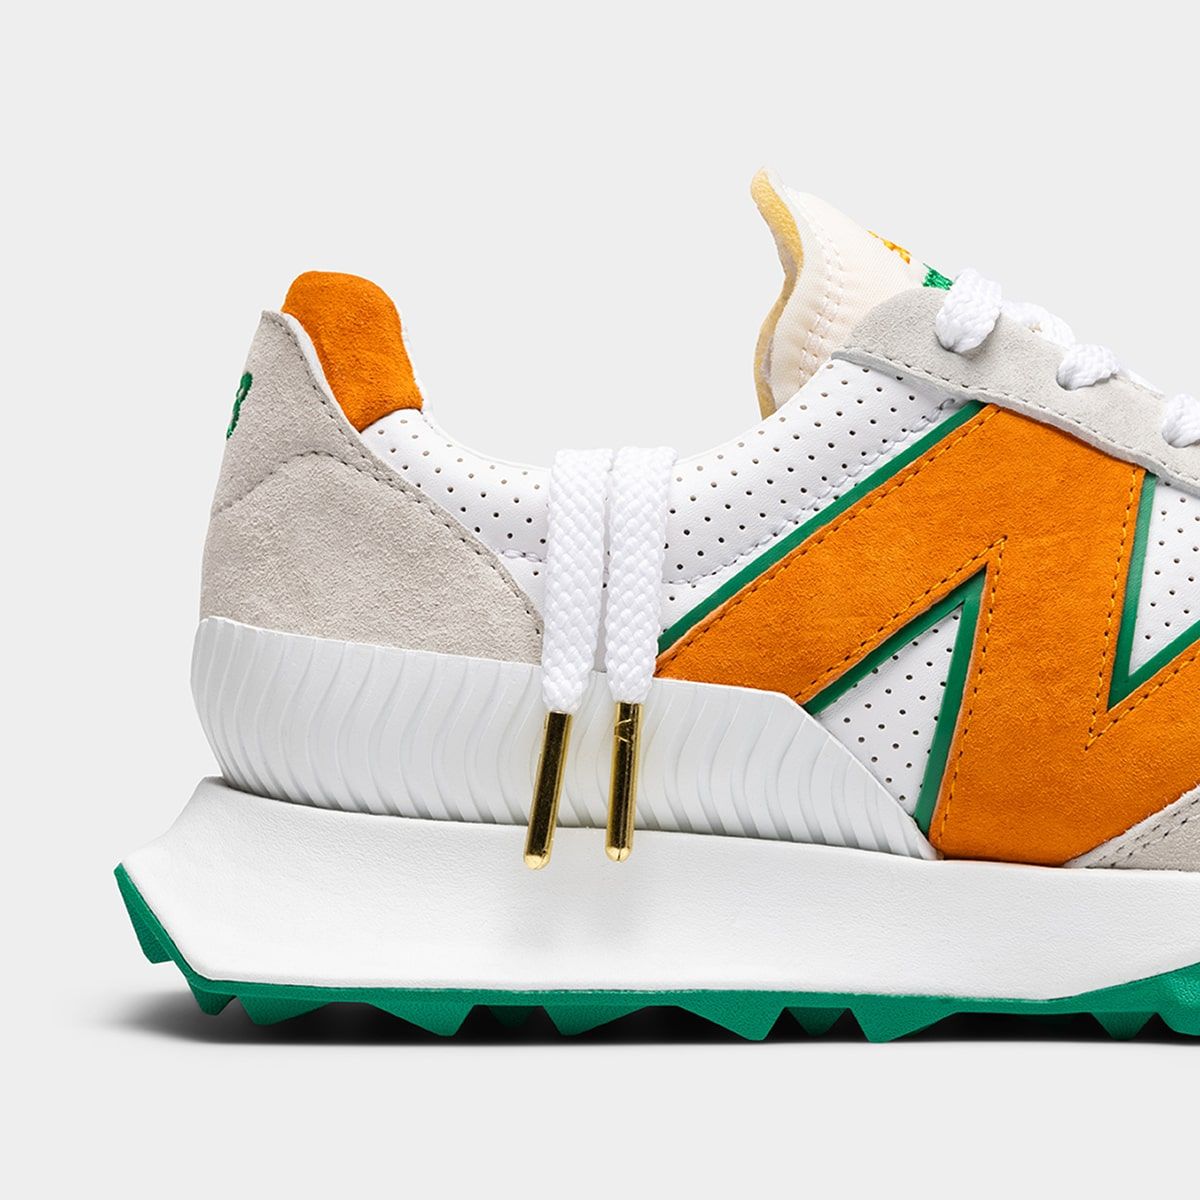 Where to Buy the Casablanca New Balance XC-72 Collection | HOUSE 